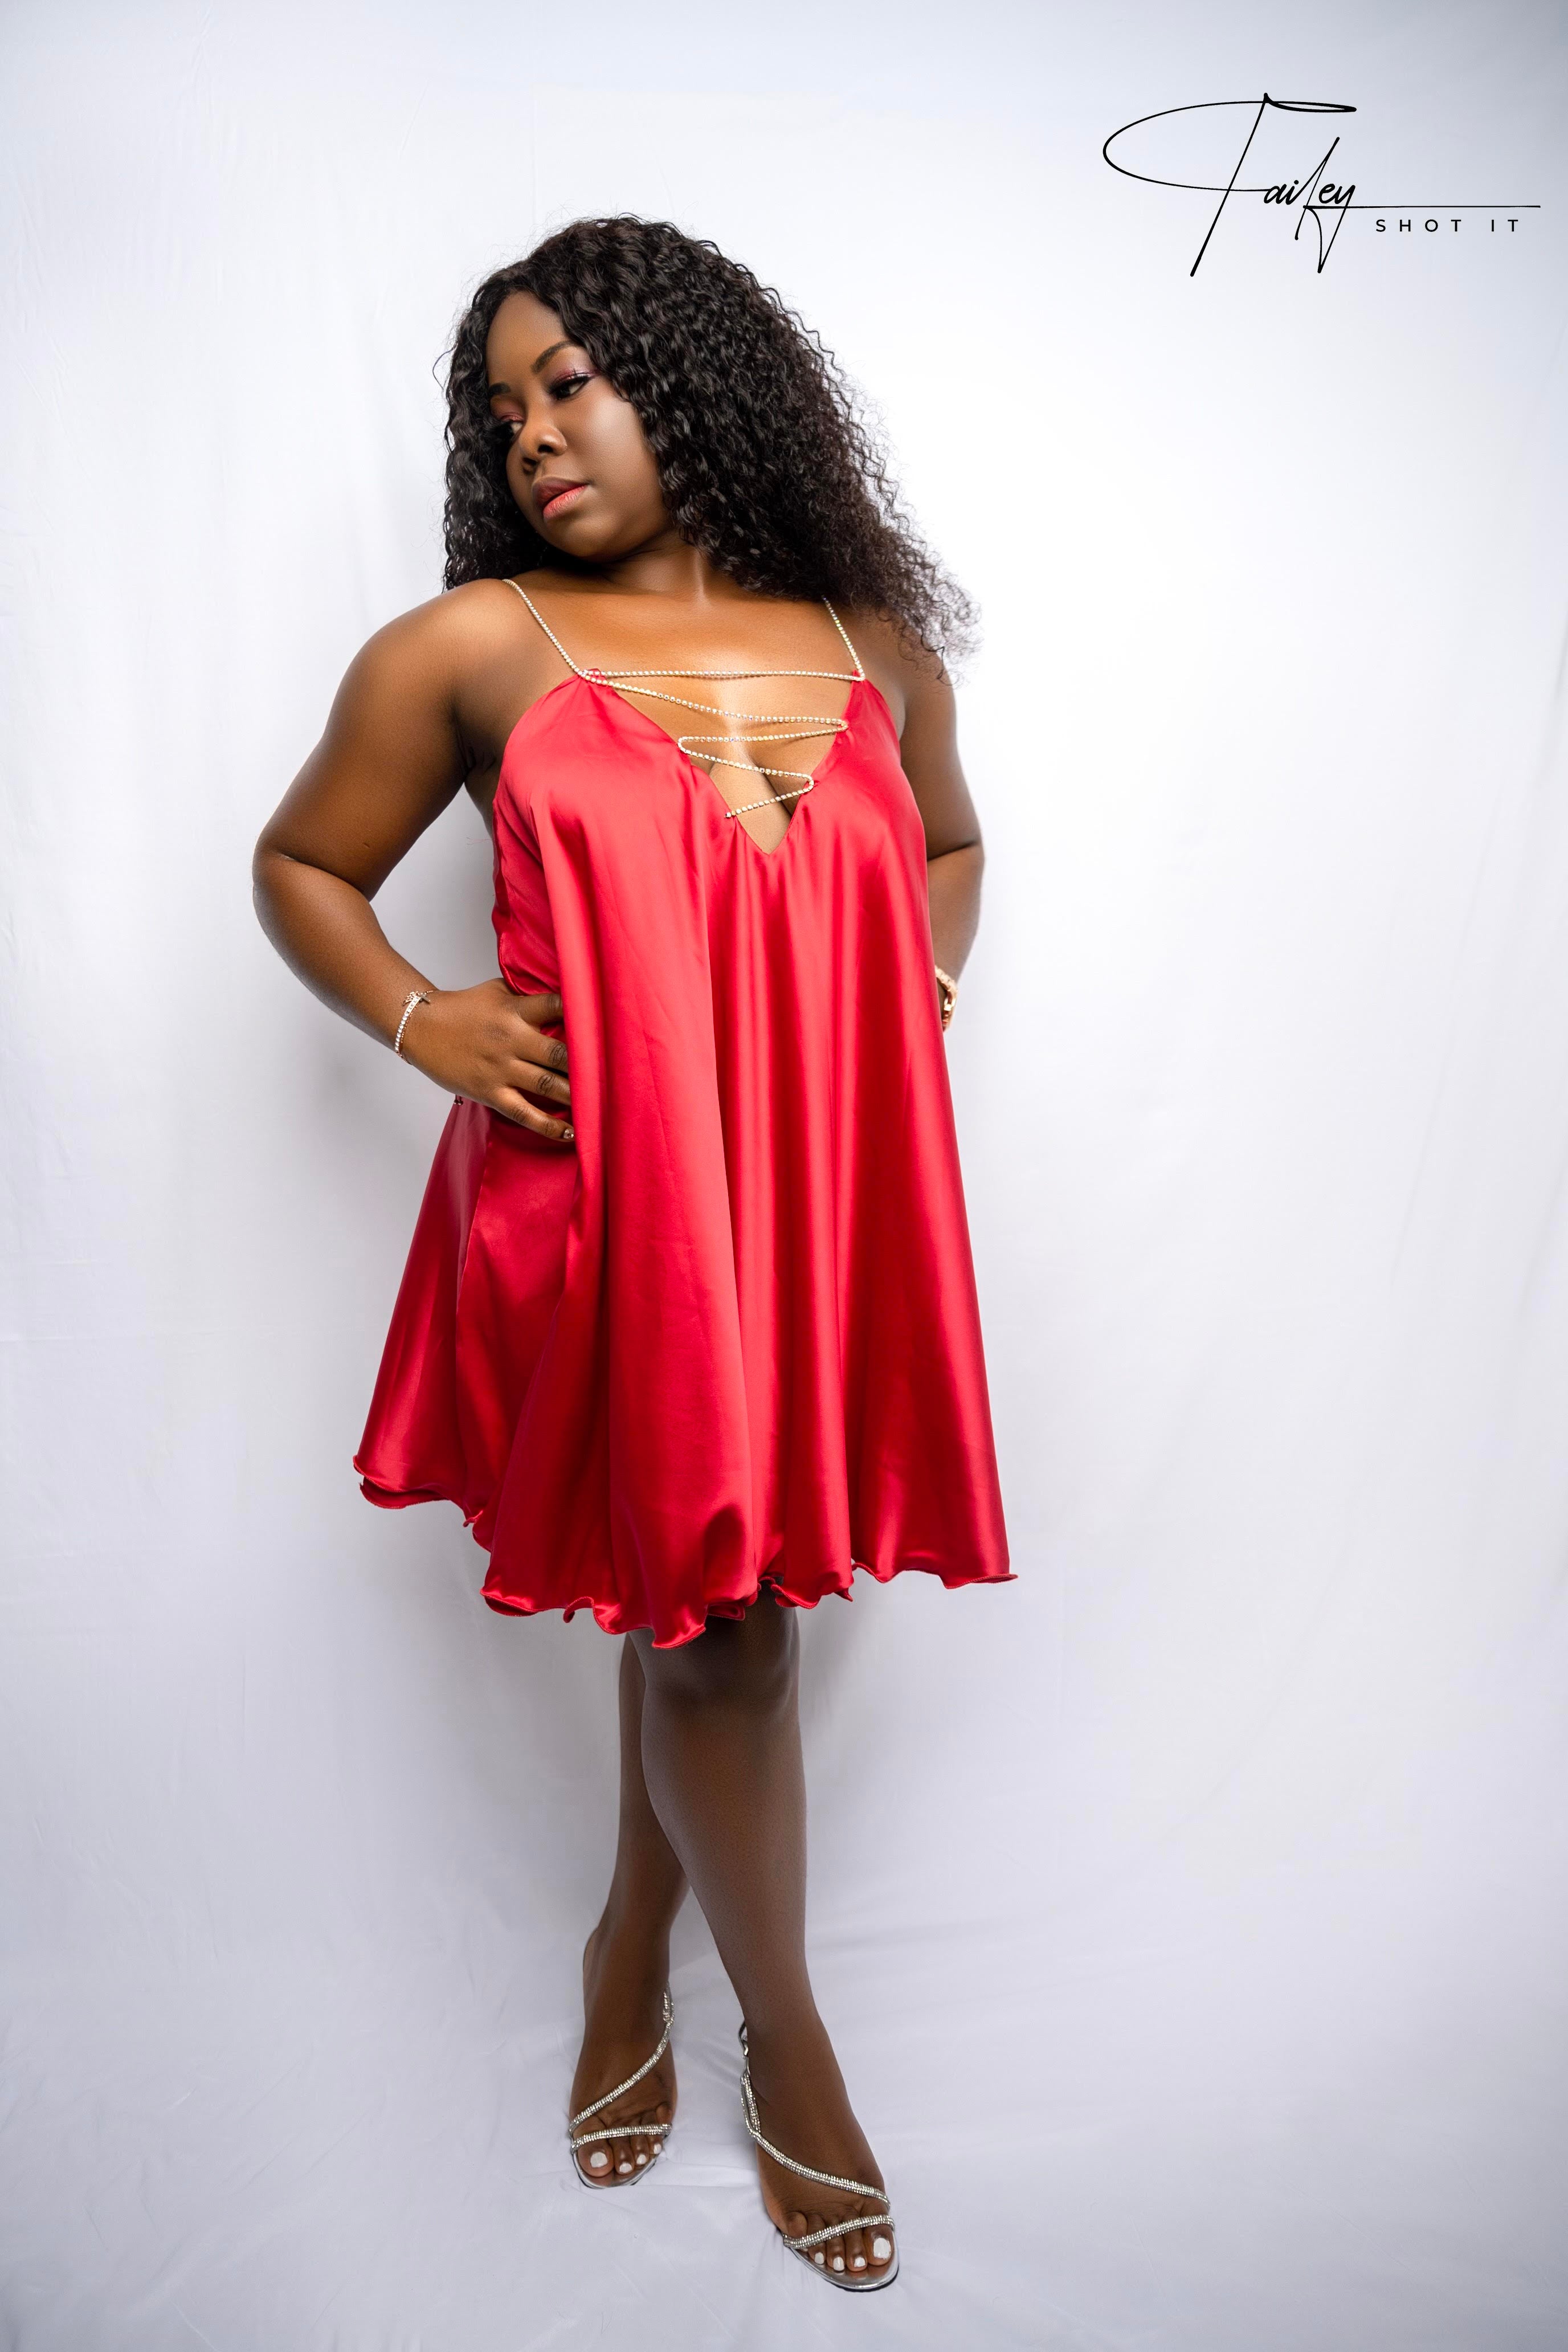 Party All Night | Red Satin Flare Short Dress with Chain Strap - BIGSTYLZ